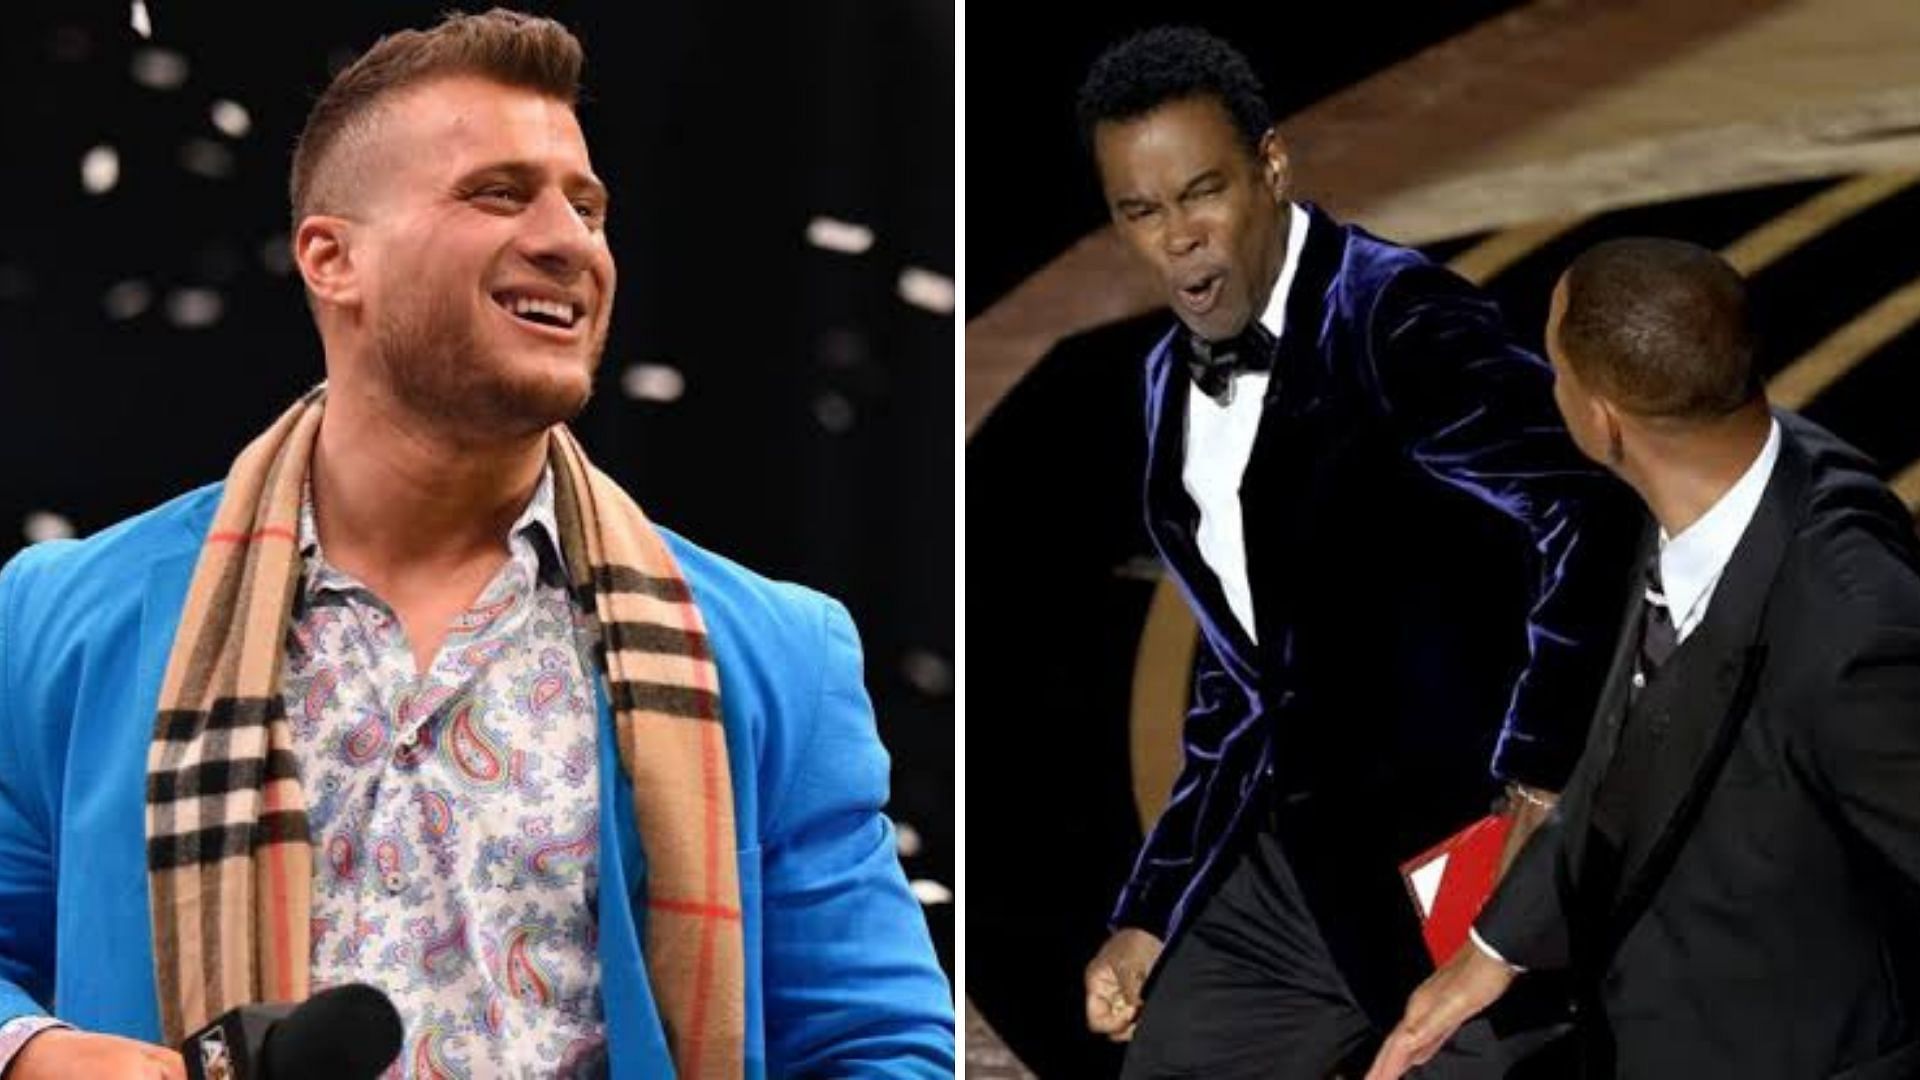 The AEW star had a hilarious take on the Oscars controversy